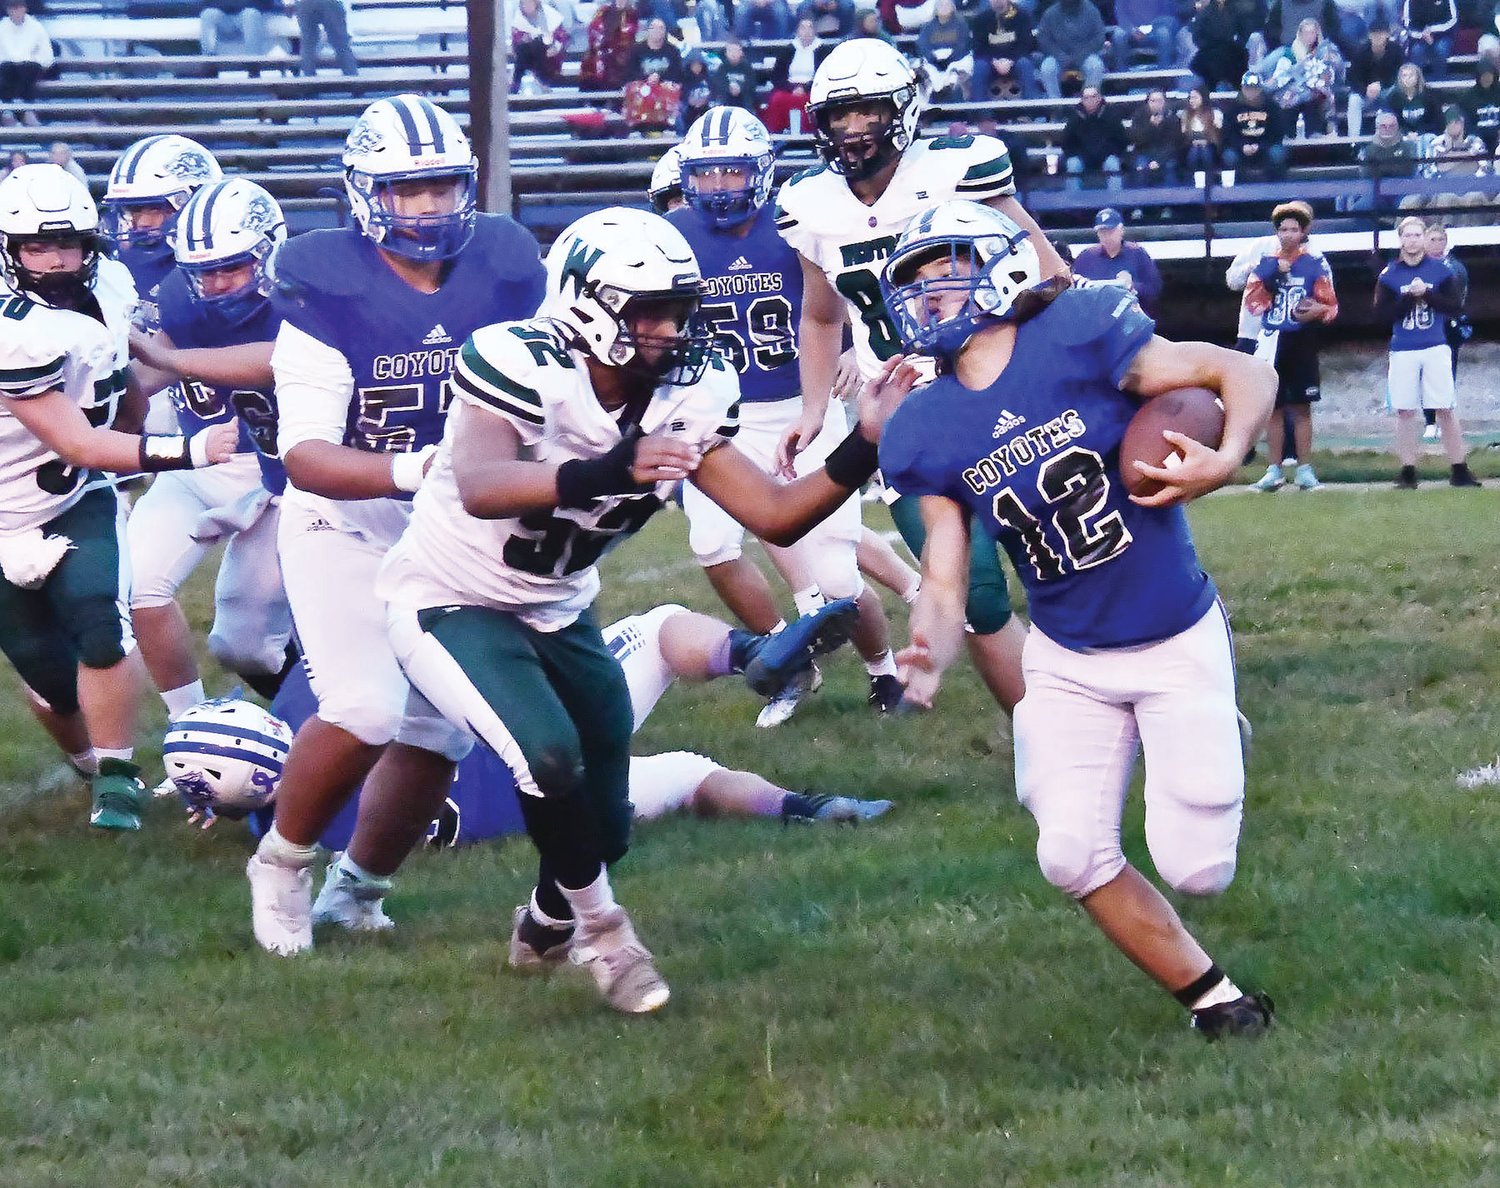 Westran linebacker Blake Williams (52) pursues Paris running back Drew Williams (12) during Friday’s Lewis & Clark Conference game at Warbritton Field in Paris. The Hornets pulled away late, securing a 46-8 victory, their second of the season.